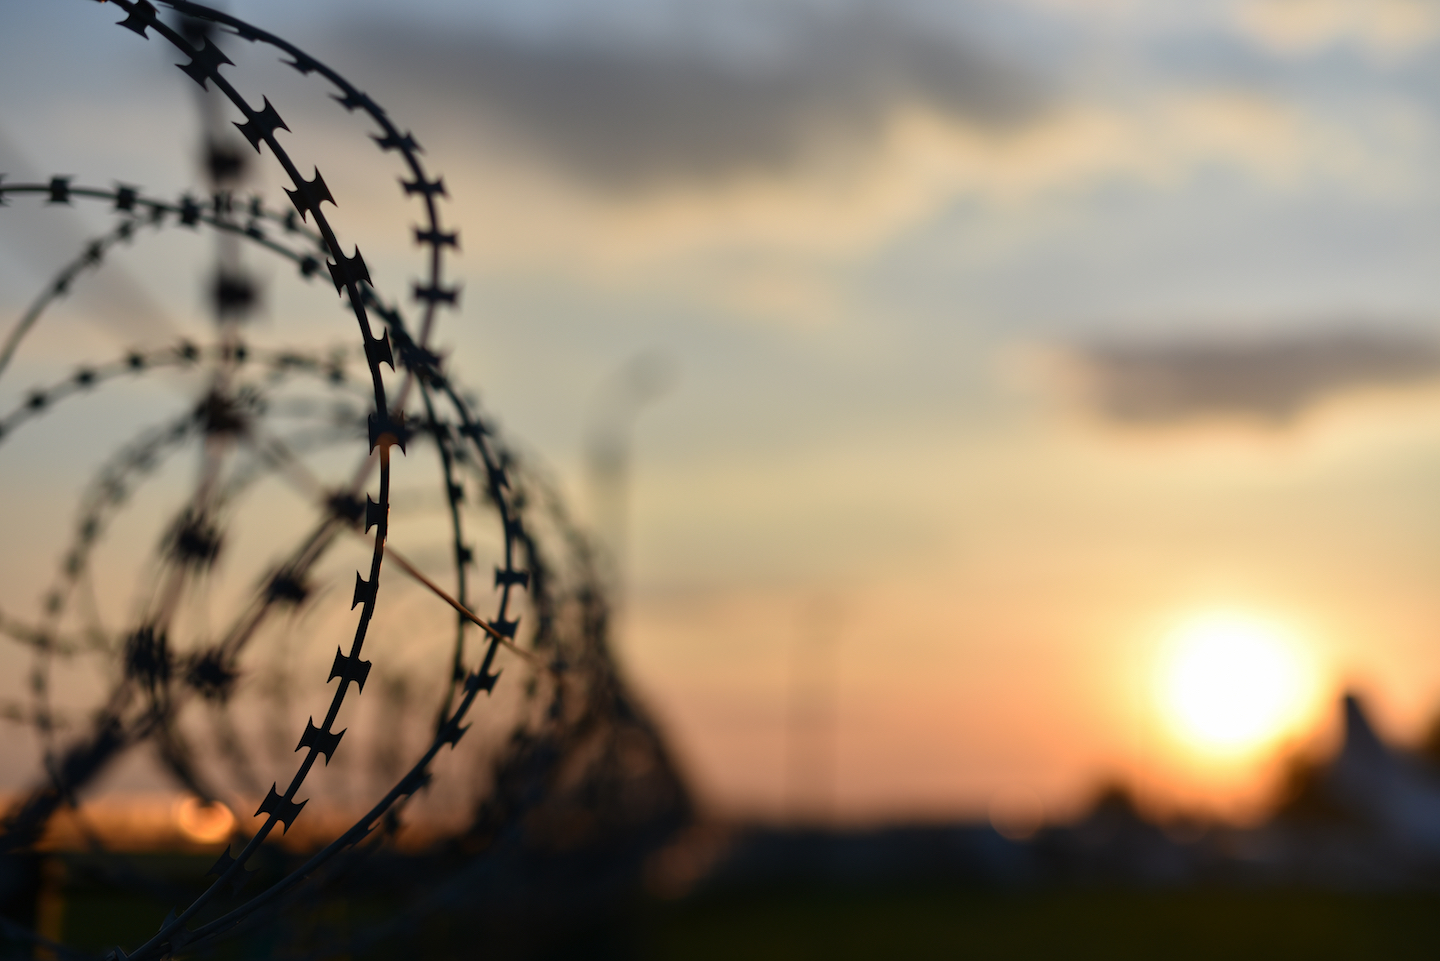 Hotter Temperaments: Prisons and Violence in a Warming World